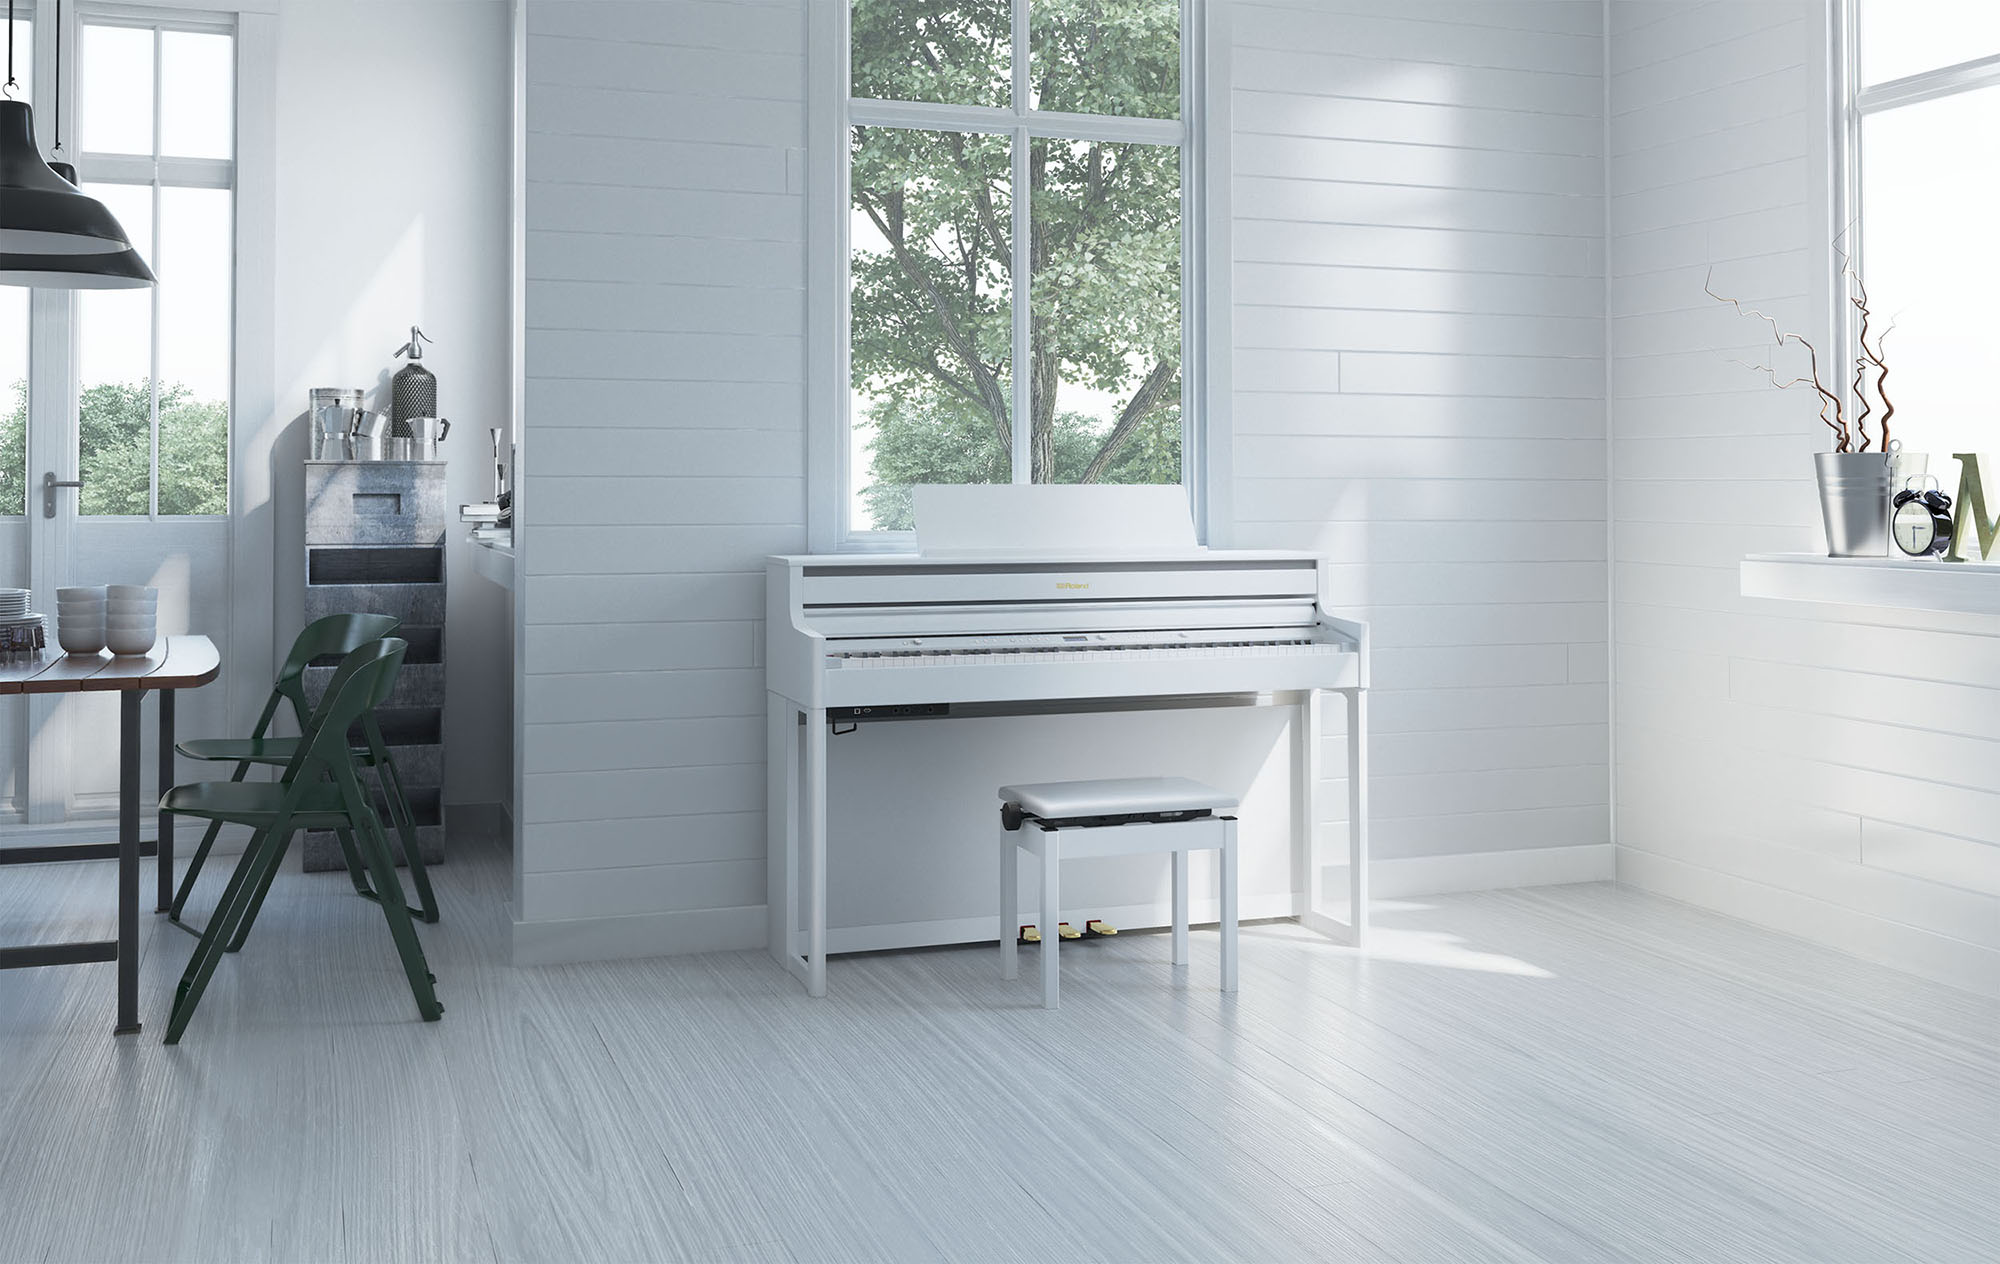 Roland Hp704 Wh White - Piano digital con mueble - Variation 1